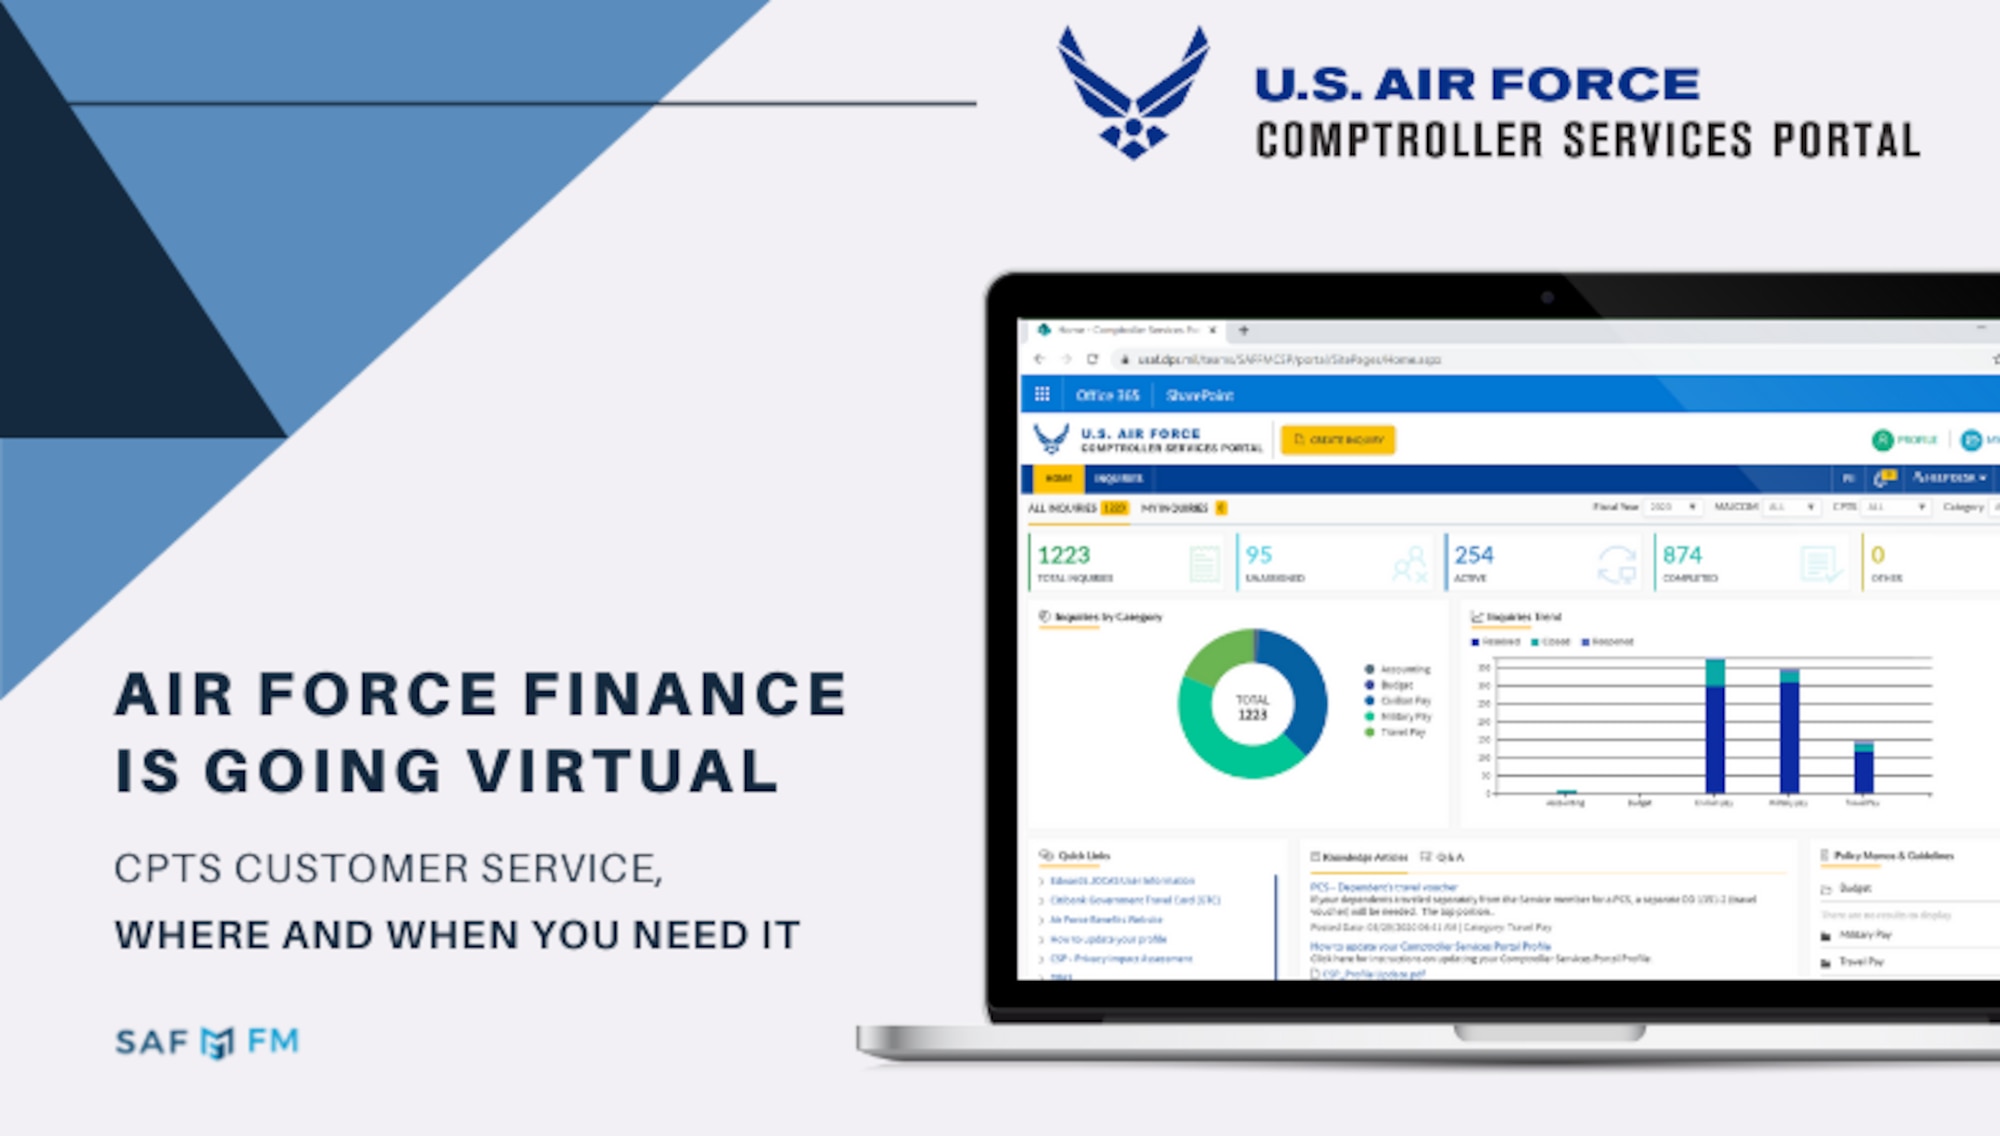 Comptroller Services Portal is an automated incident management application that allows customers to request and receive online assistance from their servicing comptroller squadron. CSP has integrated workflows which assist the customer in seeking help with travel pay, military pay and civilian pay. (U.S. Air Force courtesy graphic)